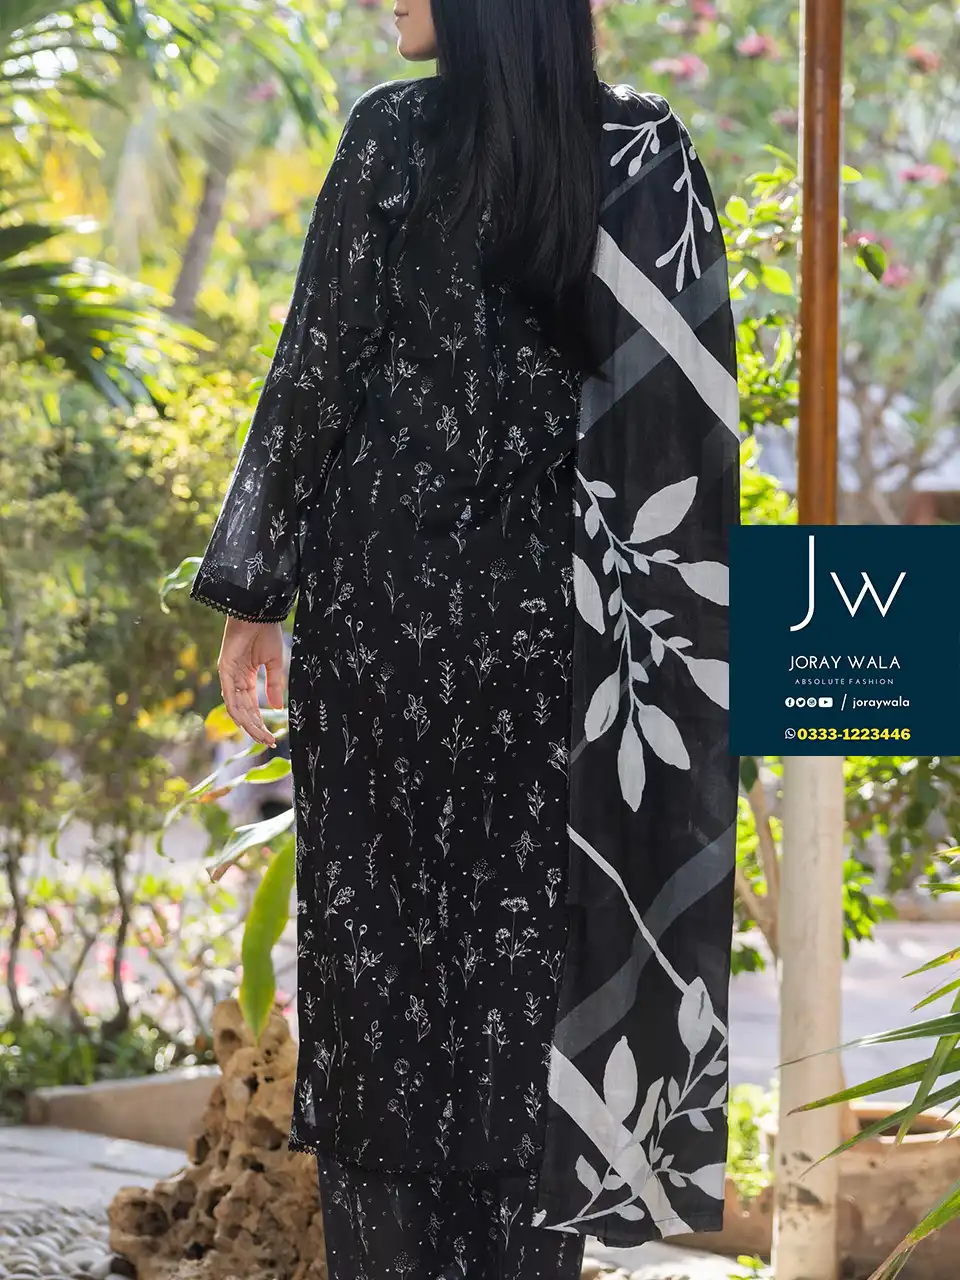 Iris allover black and white 3 pcs suit D3 with free delivery available at joraywala. AirJet Luxury Digital Printed Lawn Shirt. Airjet Luxury Digital Printed Lawn Dupatta. AirJet Luxury Digital Printed Trouser.